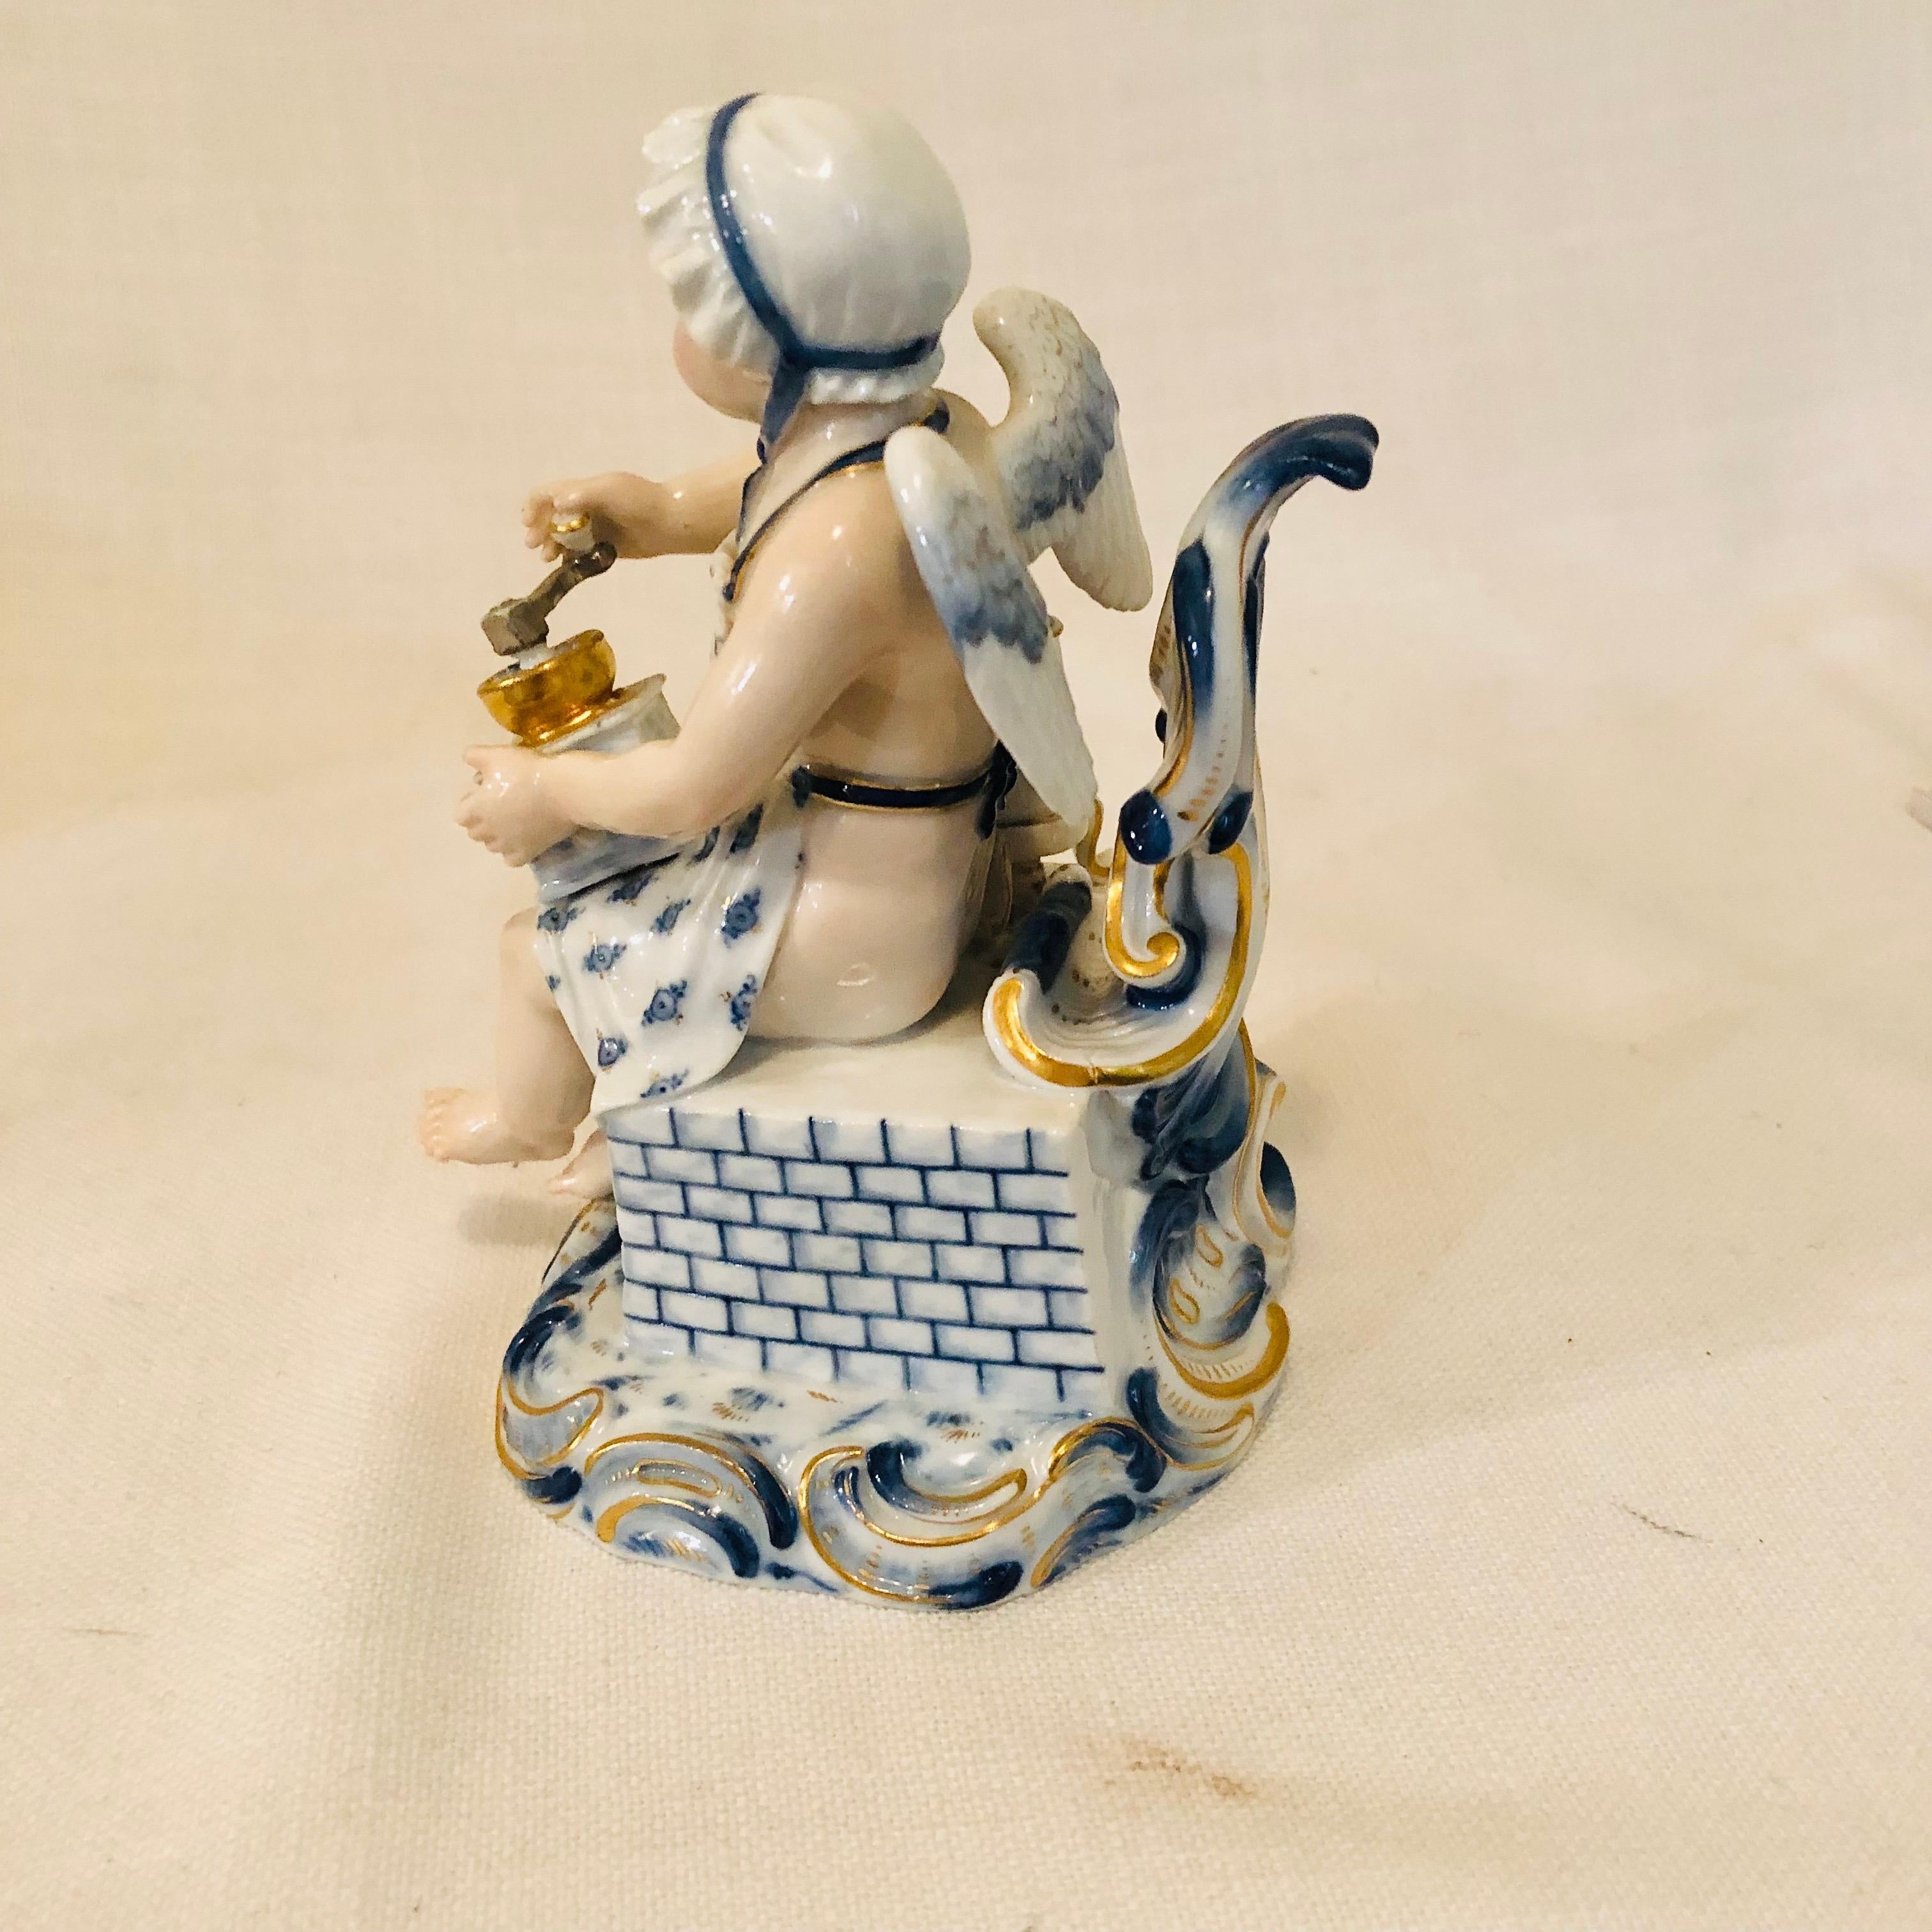 German Meissen Figurine of a Boy Angel with Wings Grounding Coffee for His Coffee Pot